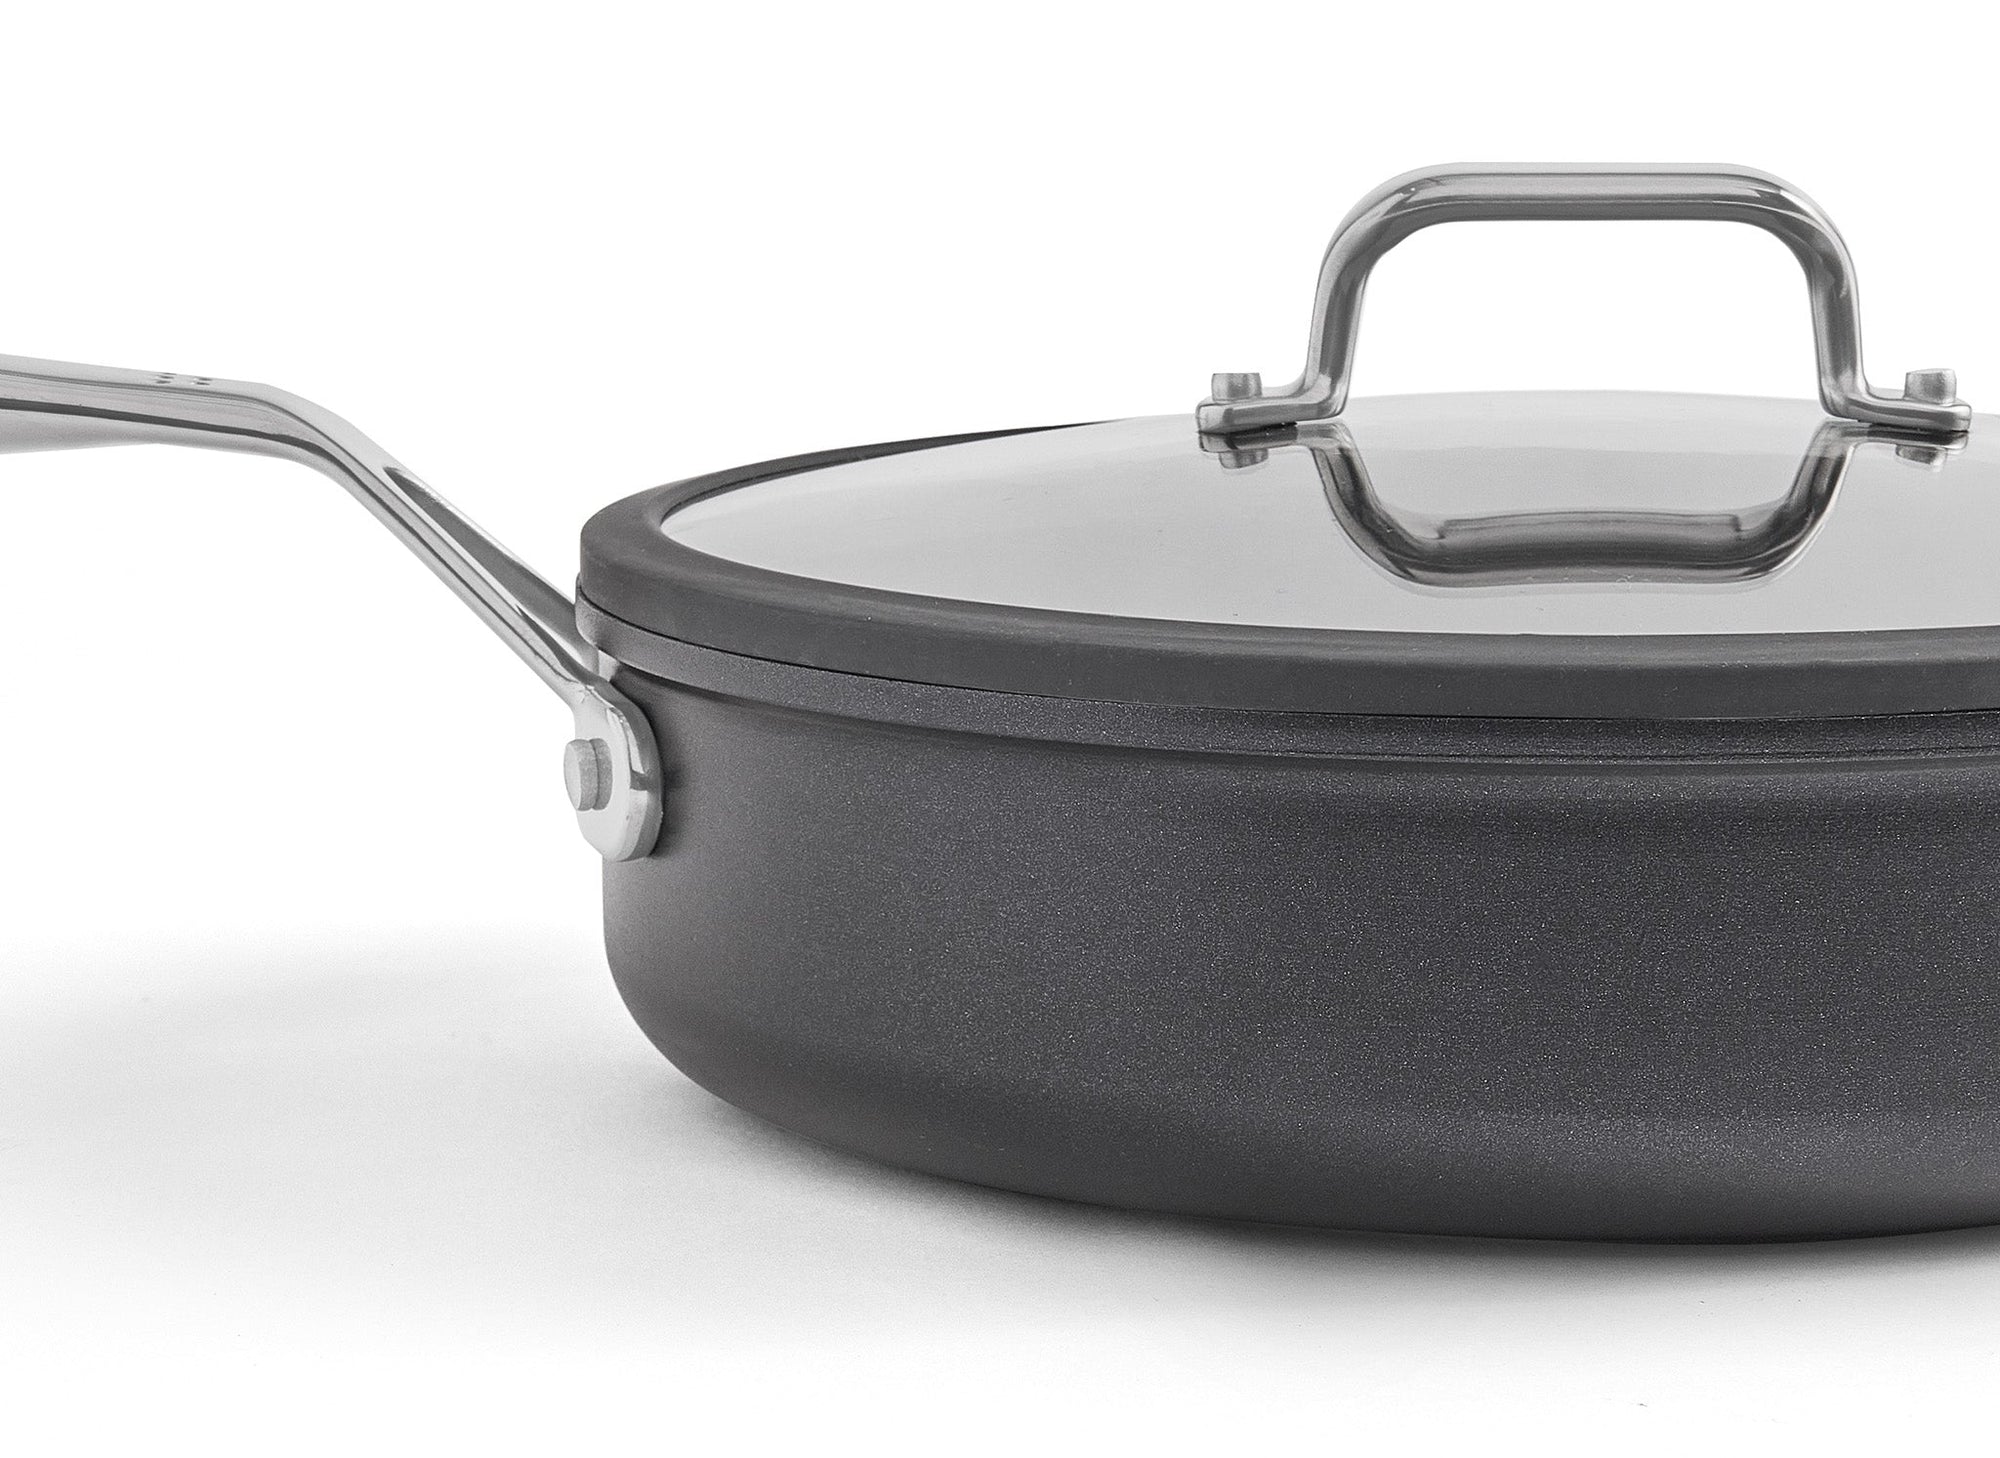 A zoomed in view of the Misen 3 QT Nonstick Sauté Pan on a white background. The left two thirds of the pan are visible.